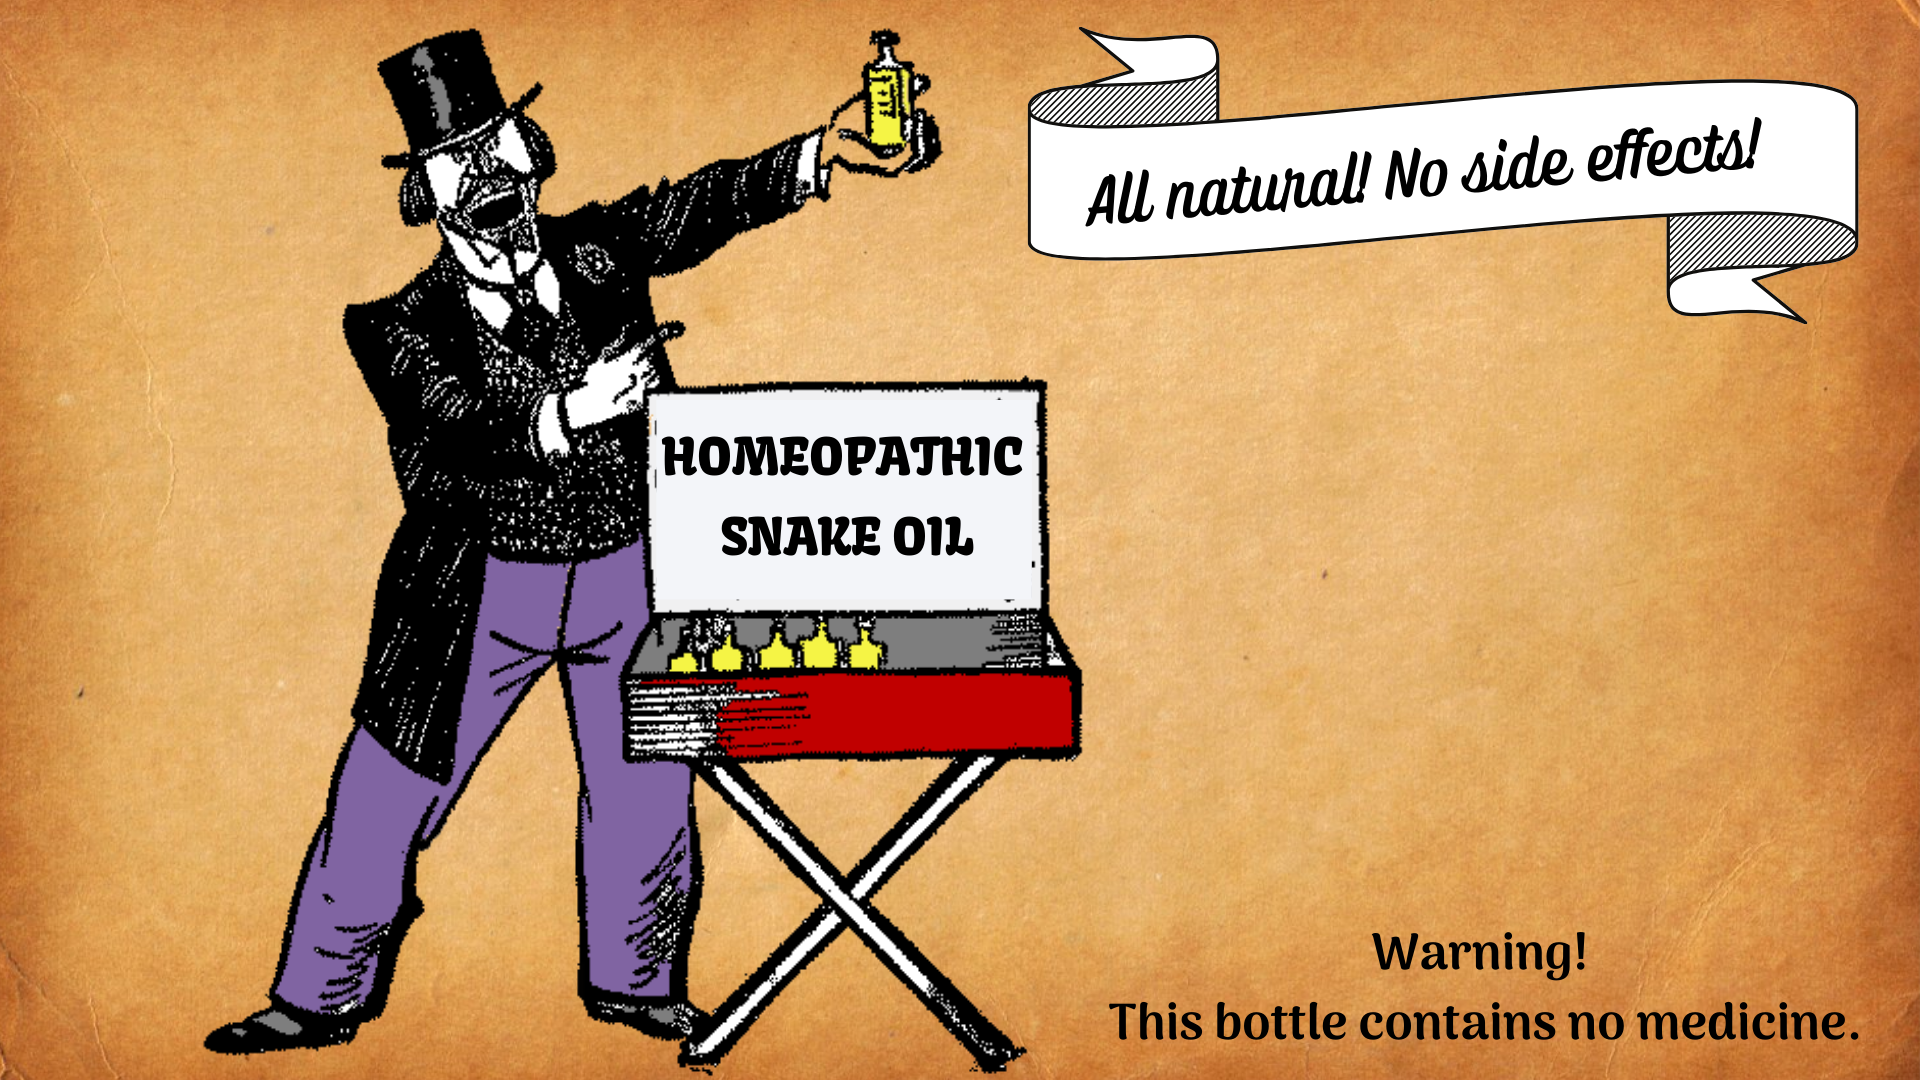 Snake oil salesman selling homeopathy, with banner that reads all natural and no side effects, and a warning that this bottle contains no medicine